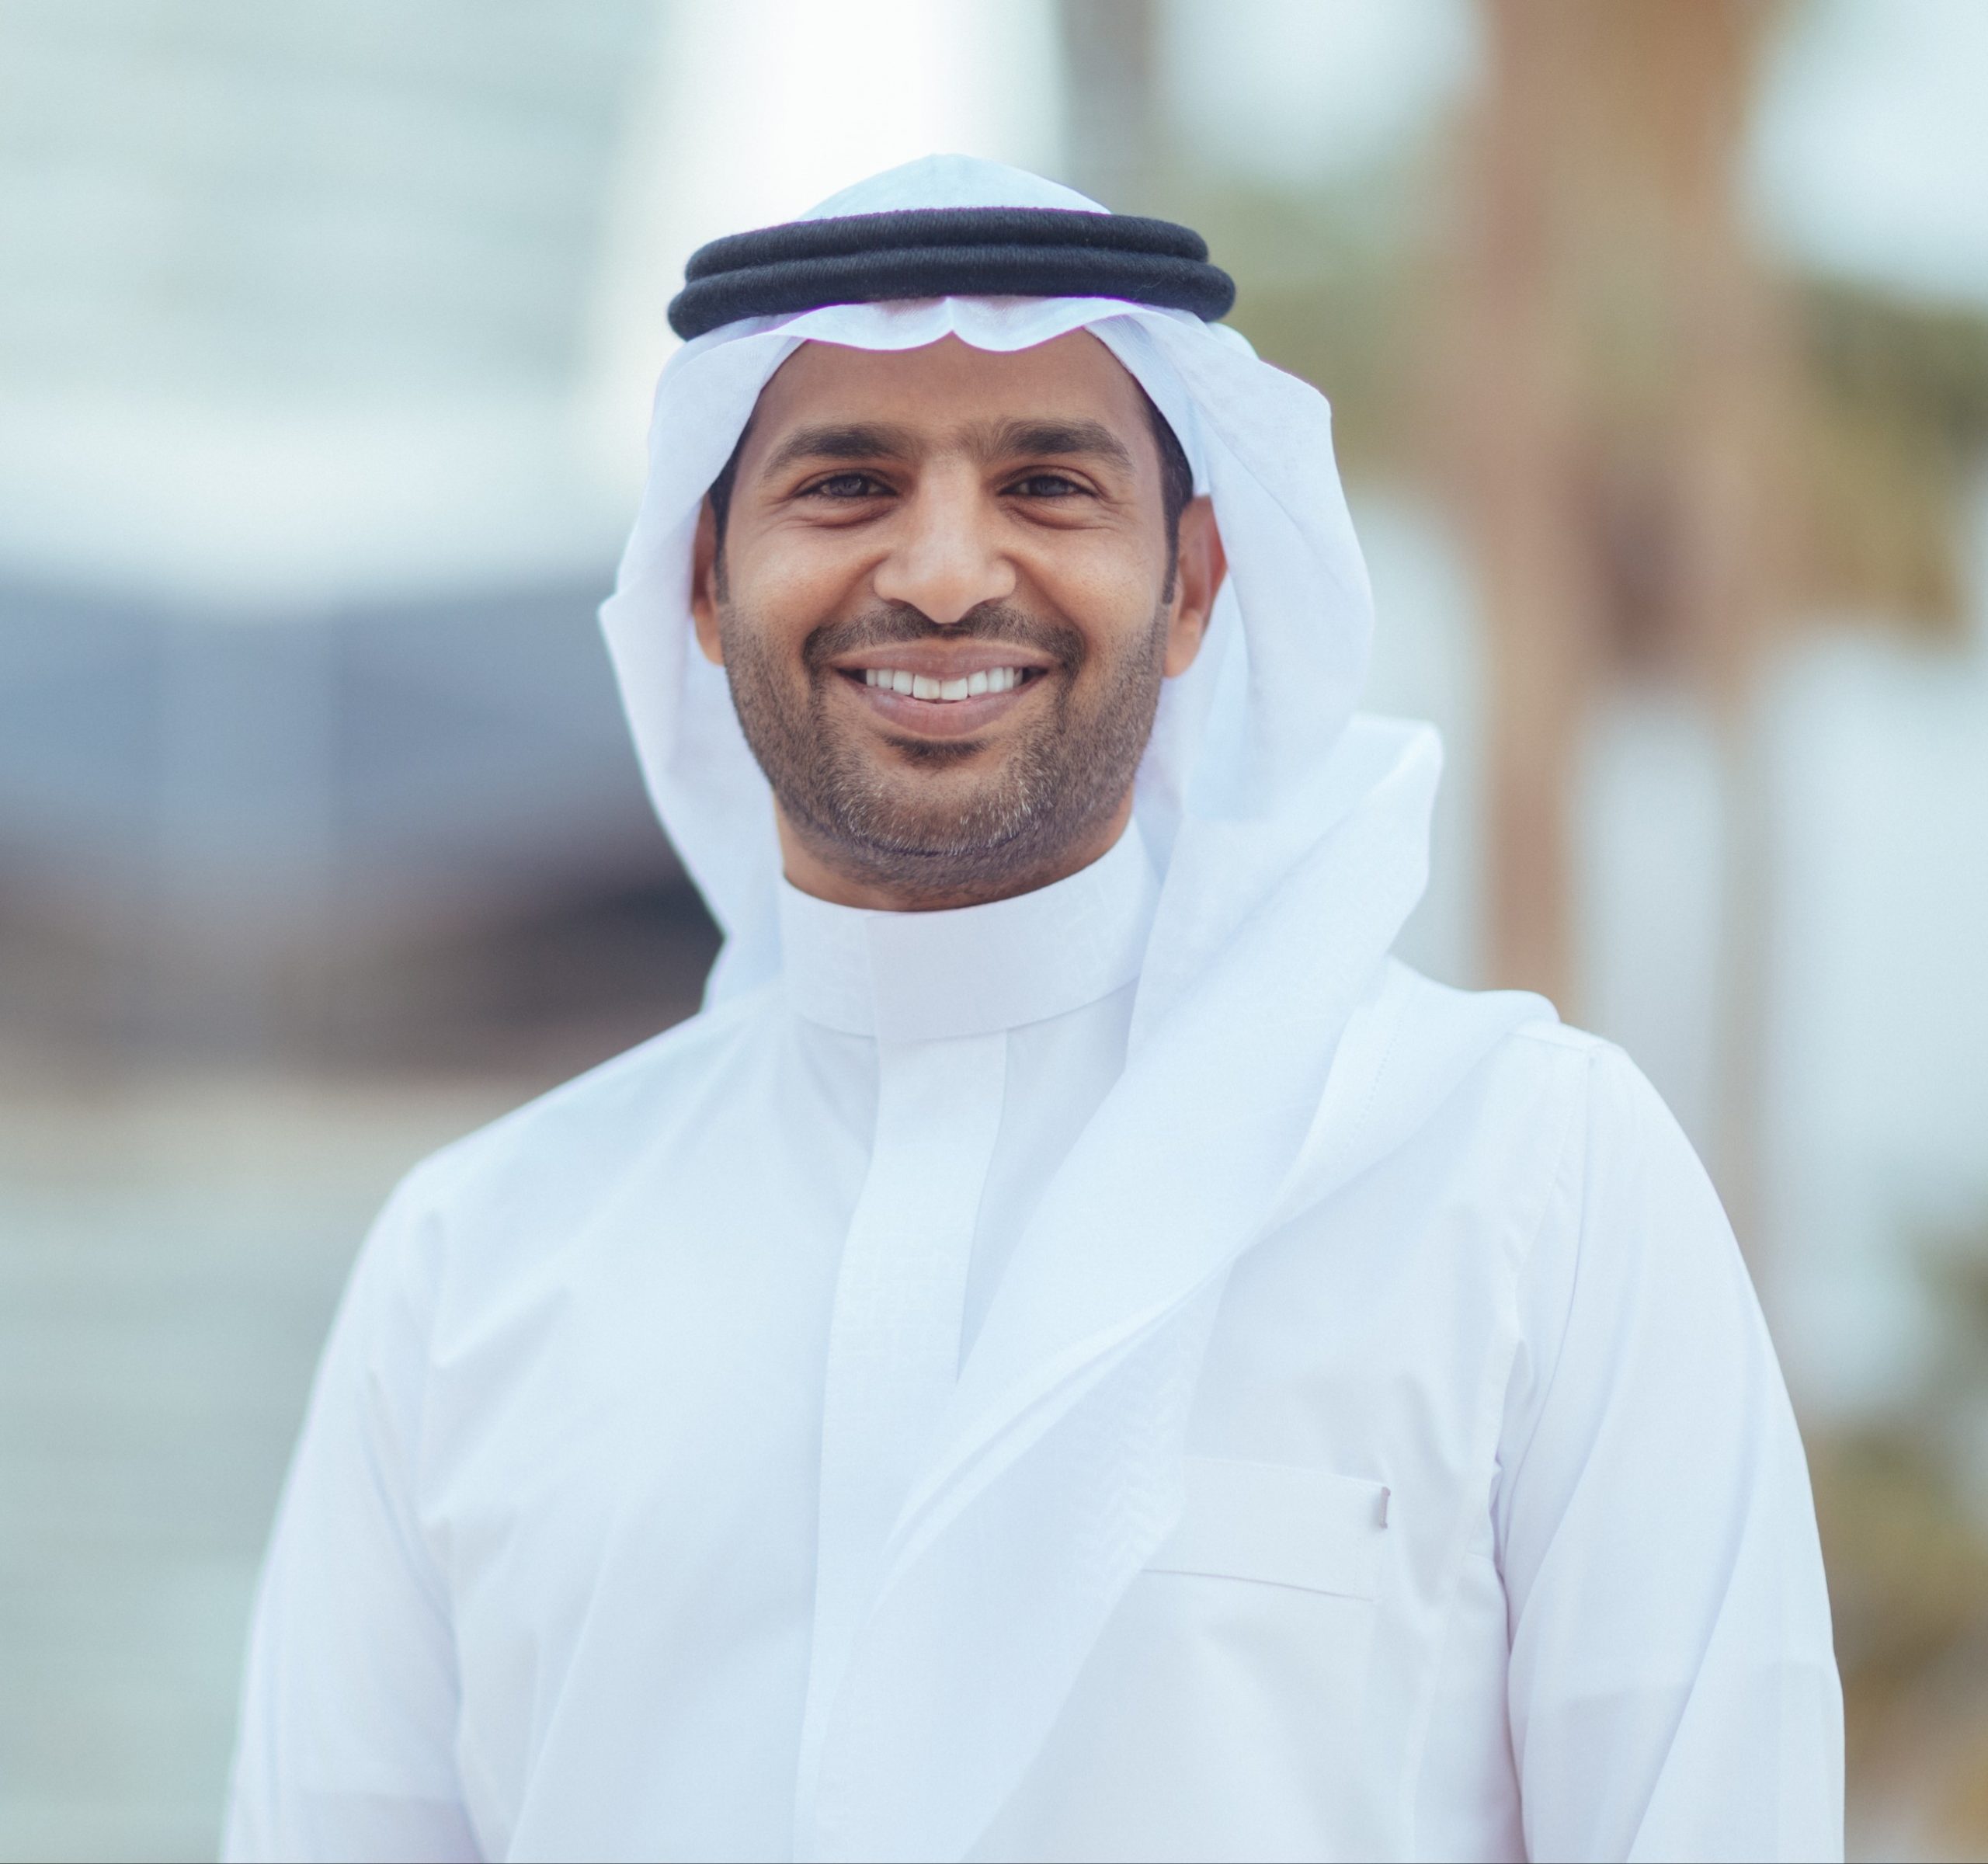 Mofeed Al Nowaisir Chief Digital Officer at MBC GROUP scaled